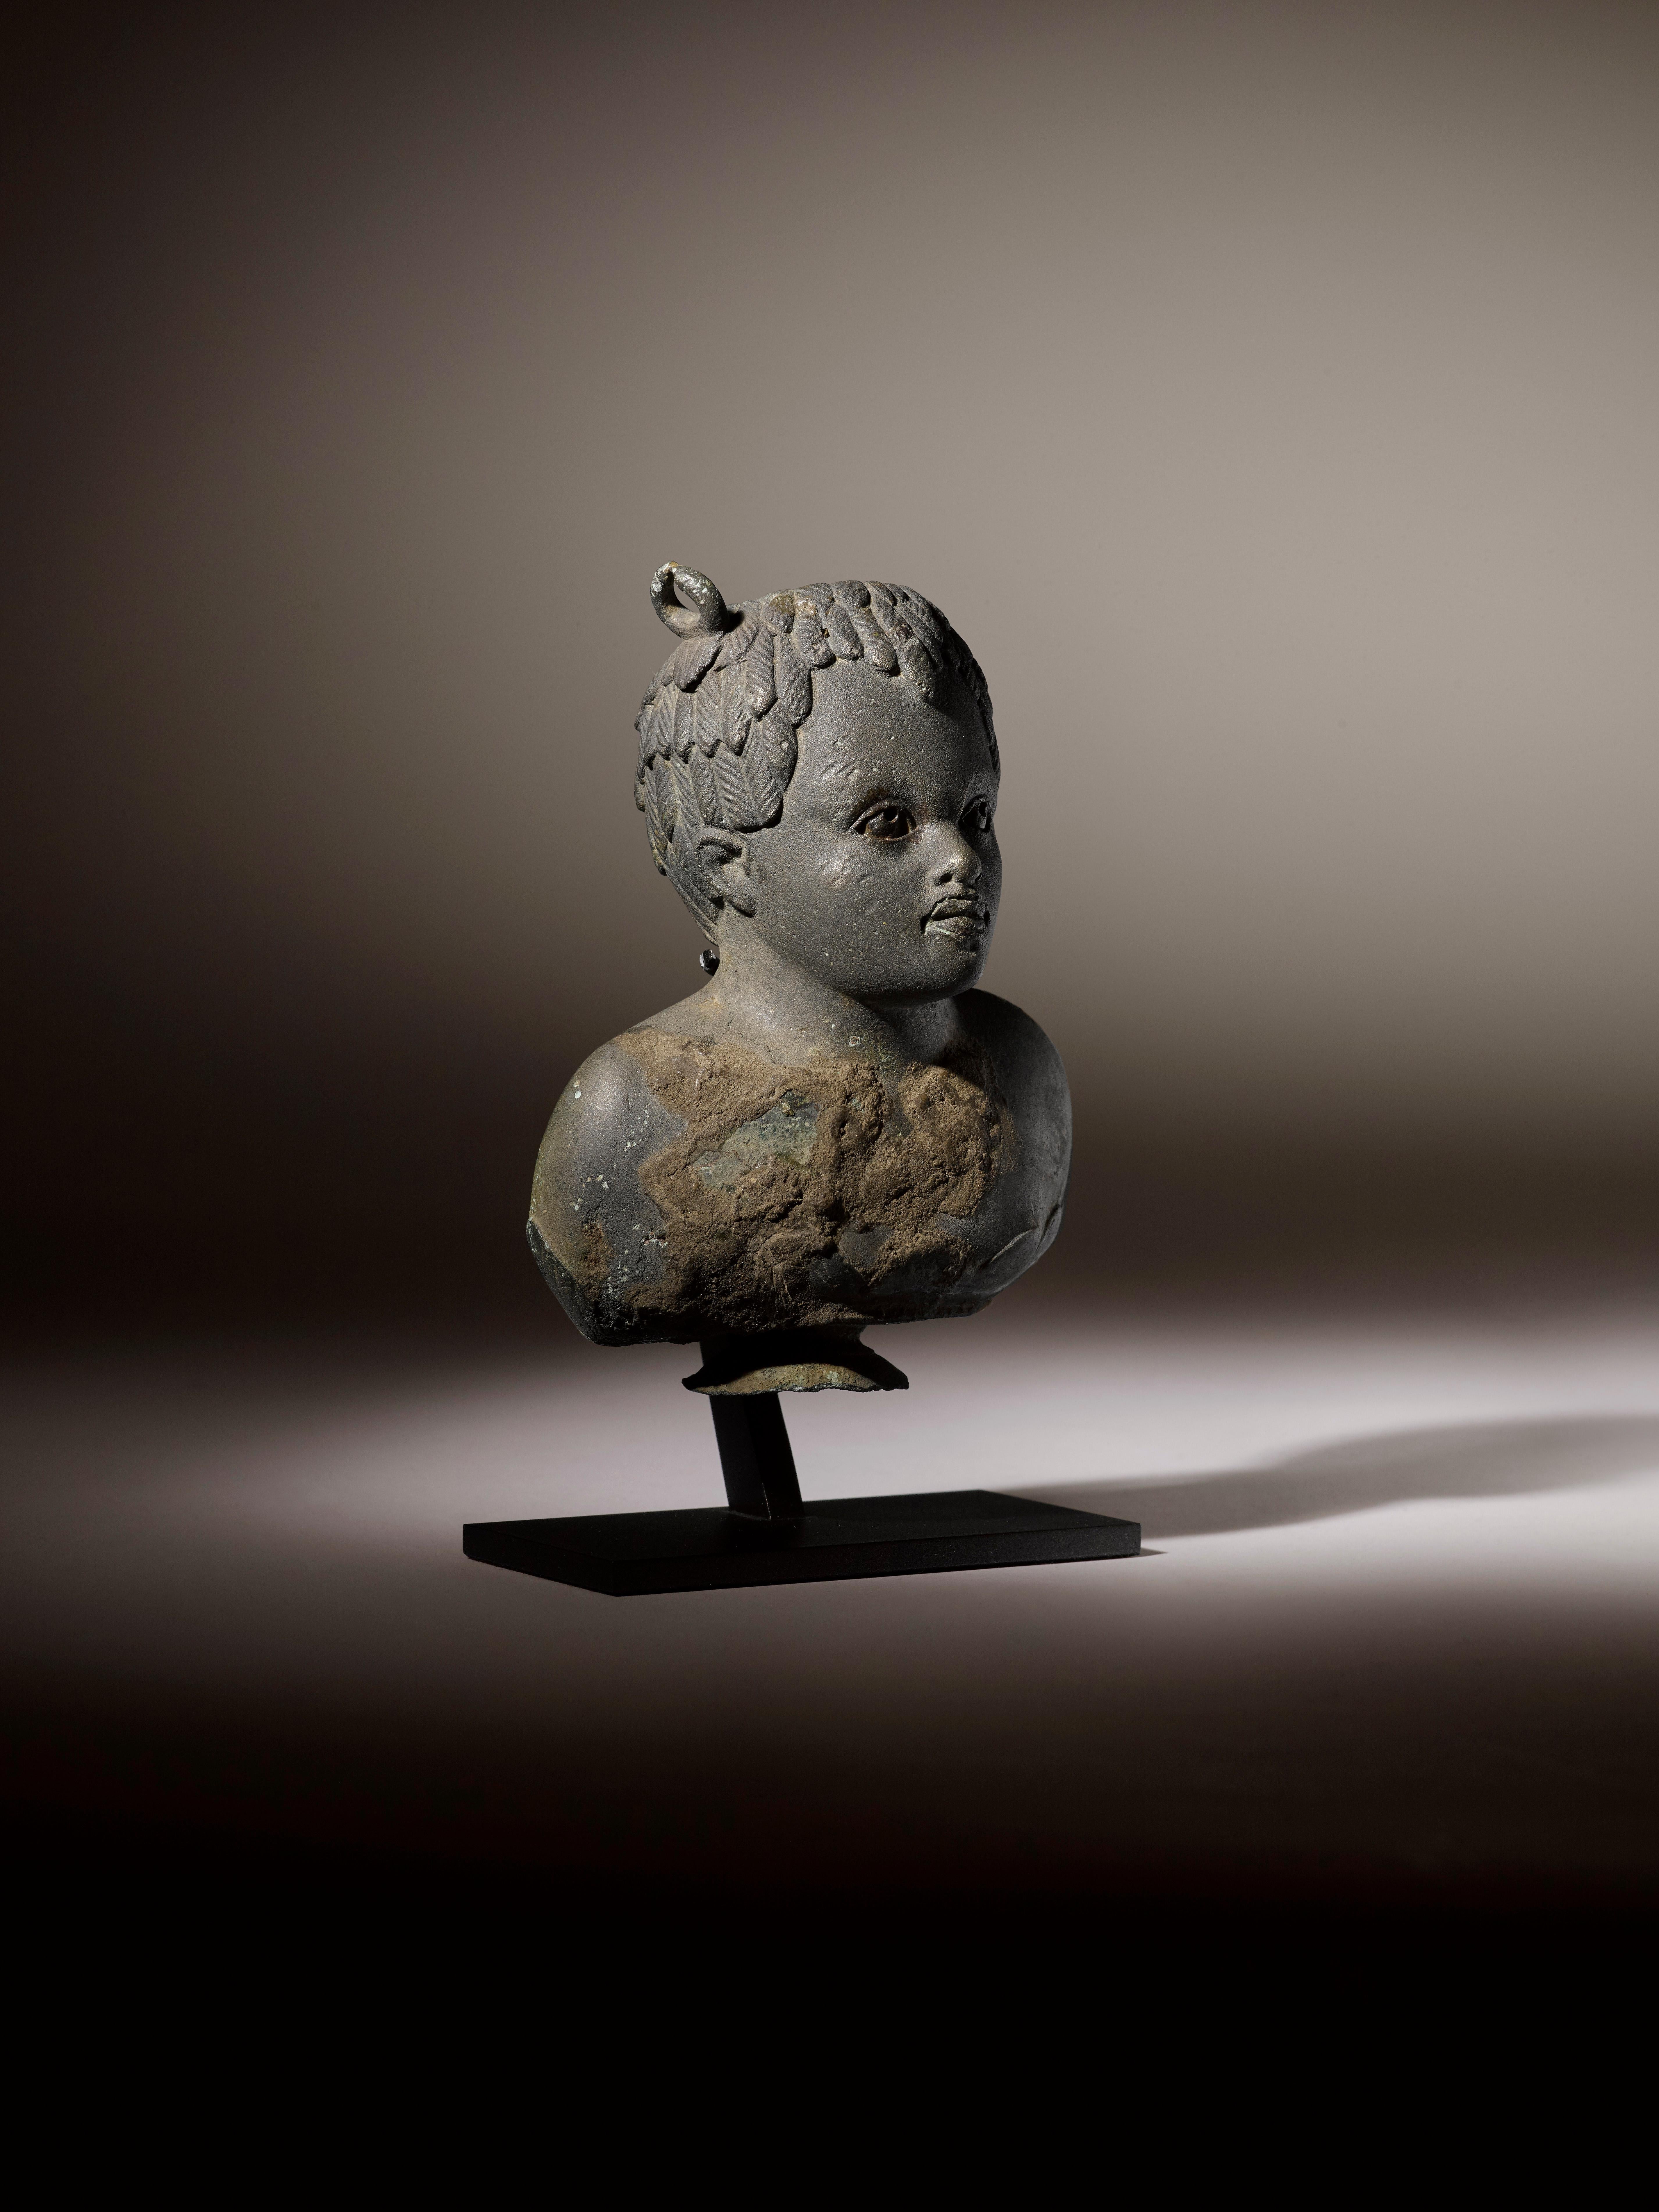 Balsamarium shaped as a Bust of a Black Boy

Bronze, silver inlaid eyes and lips, Roman, 1st – 2nd Century AD
Provenance:  
Private London Collection formed 1965-1975
 
H 10 cm (4 inch)

This exquisite Roman bronze balsamarium, dating from the 1st